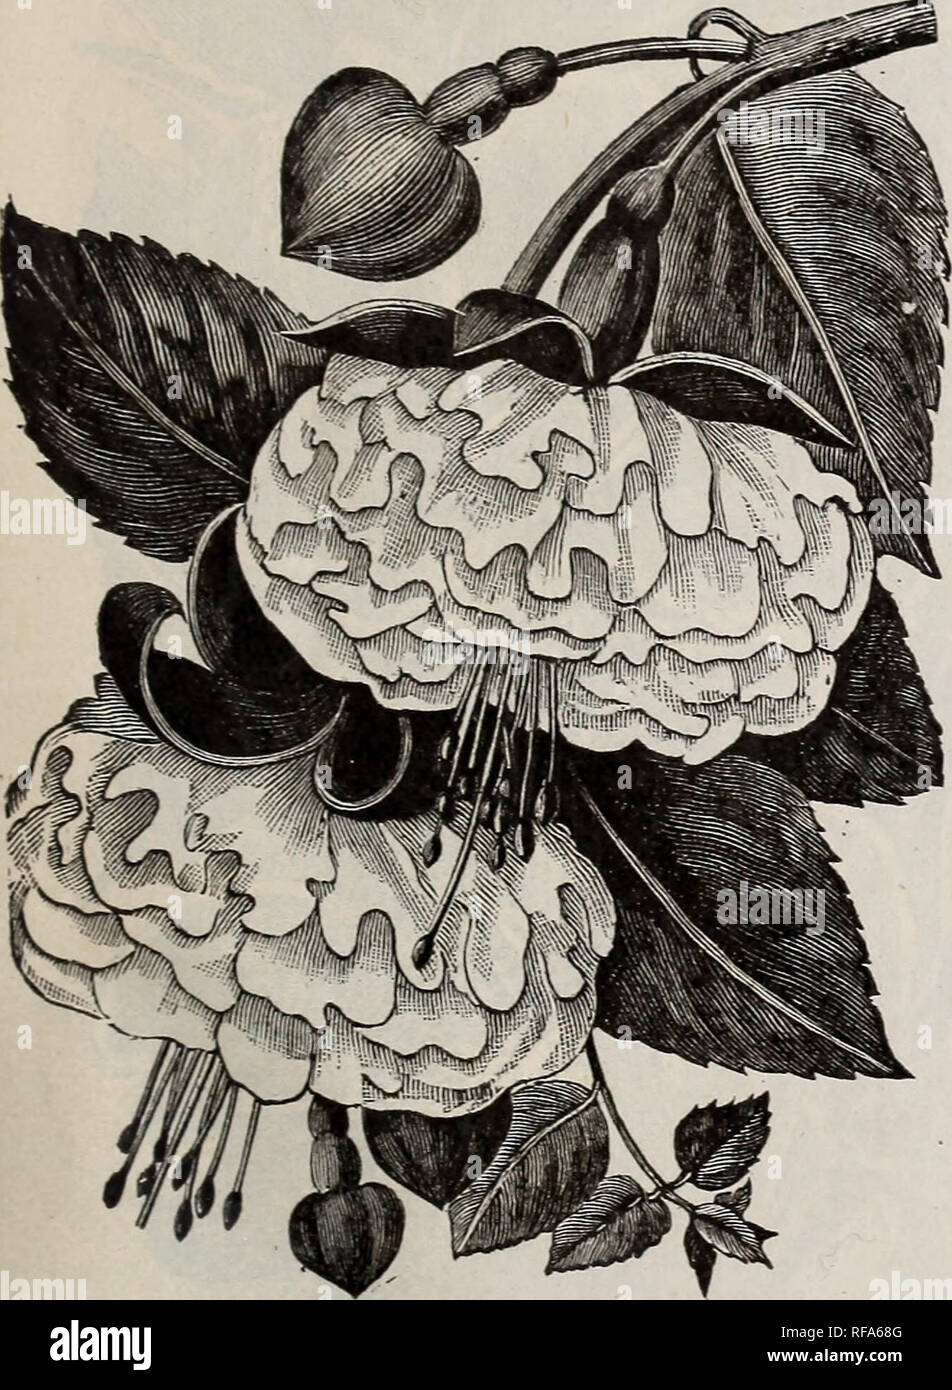 . [Catalogue of] Cottage Rose Garden. Nursery stock Ohio Columbus; Flowers Catalogs. 35 FUGHSIiftS.- : 9 * % FUCHSIAS, or Ladies' Eardrop, are elegant flowers, delicate in coloring and exquisitely graceful in form. There I j- are many partially shaded sides in the garden, where they succeed admirably, more especially if the soil.is made I / rich, and they have occasionally a good soaking of water. It is not advisable to place them in the full sun, as I / they frequently shed all their leaves in such positions, and look unhappy. A position where they are protected I I from the sun from 10 a. m. Stock Photo